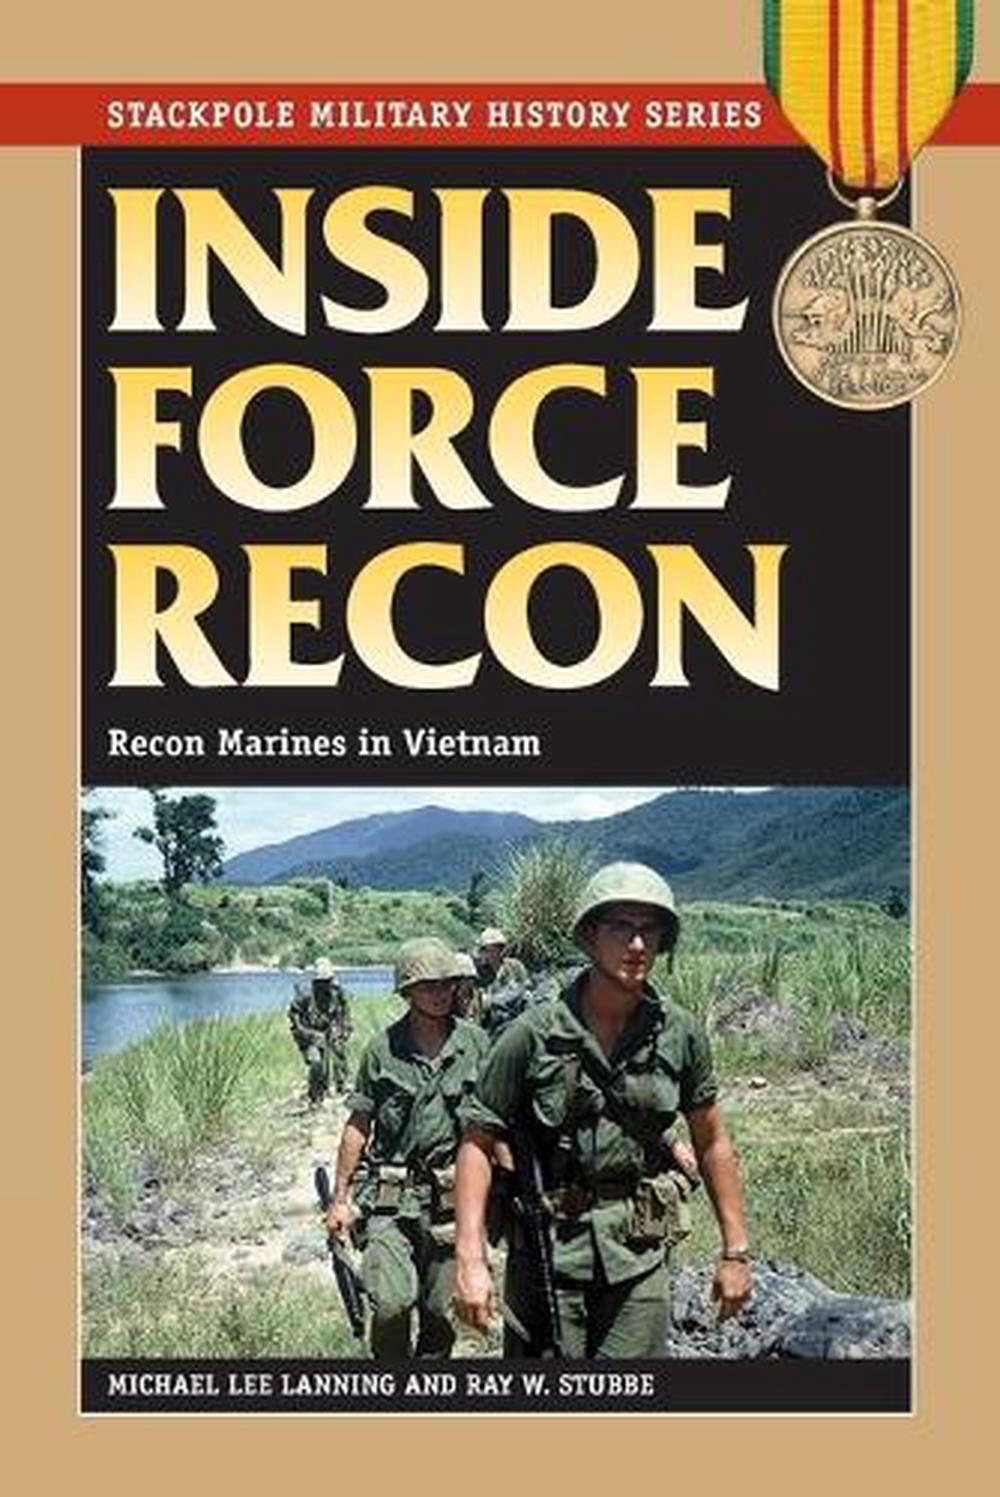 Inside Force Recon Recon Marines in Vietnam by Michael Lee Lanning